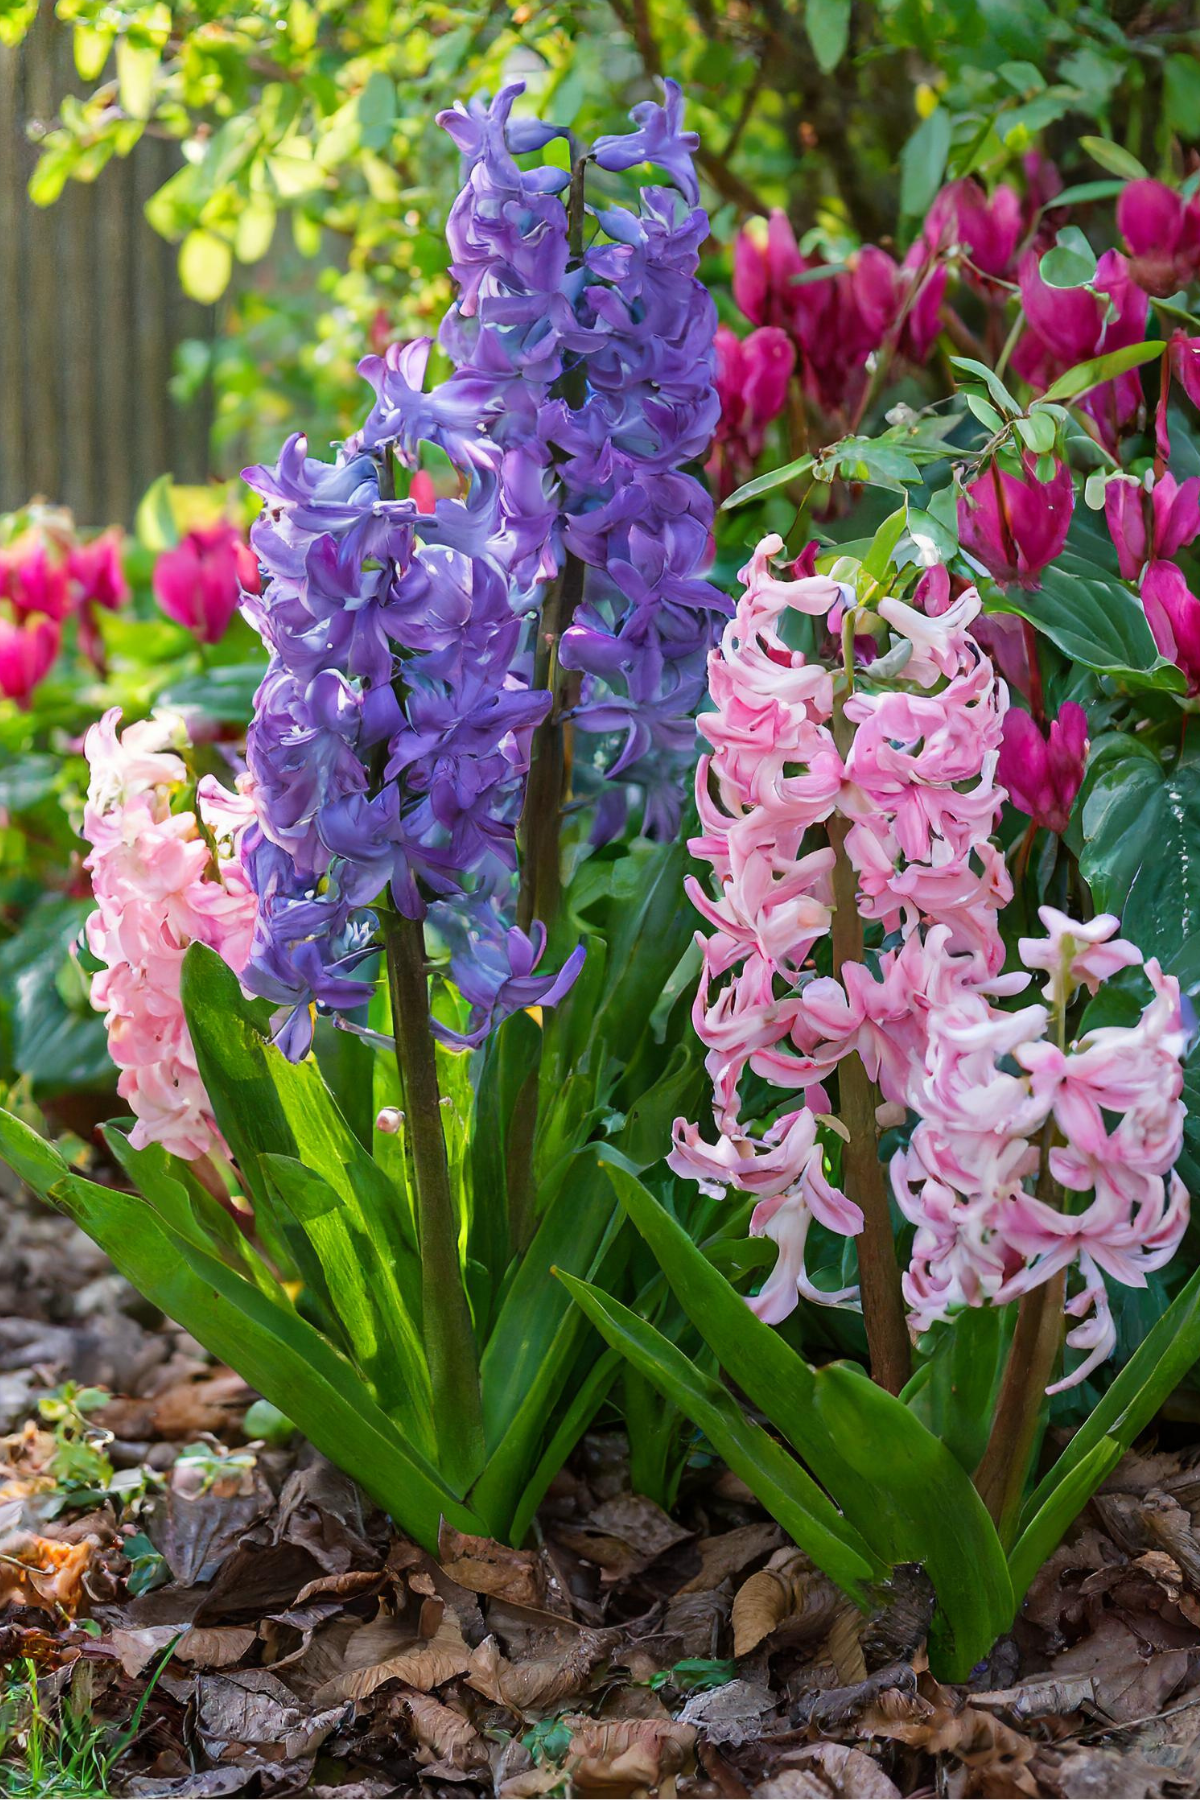 Hyacinths growing in front of a Dicentra bleeding heart